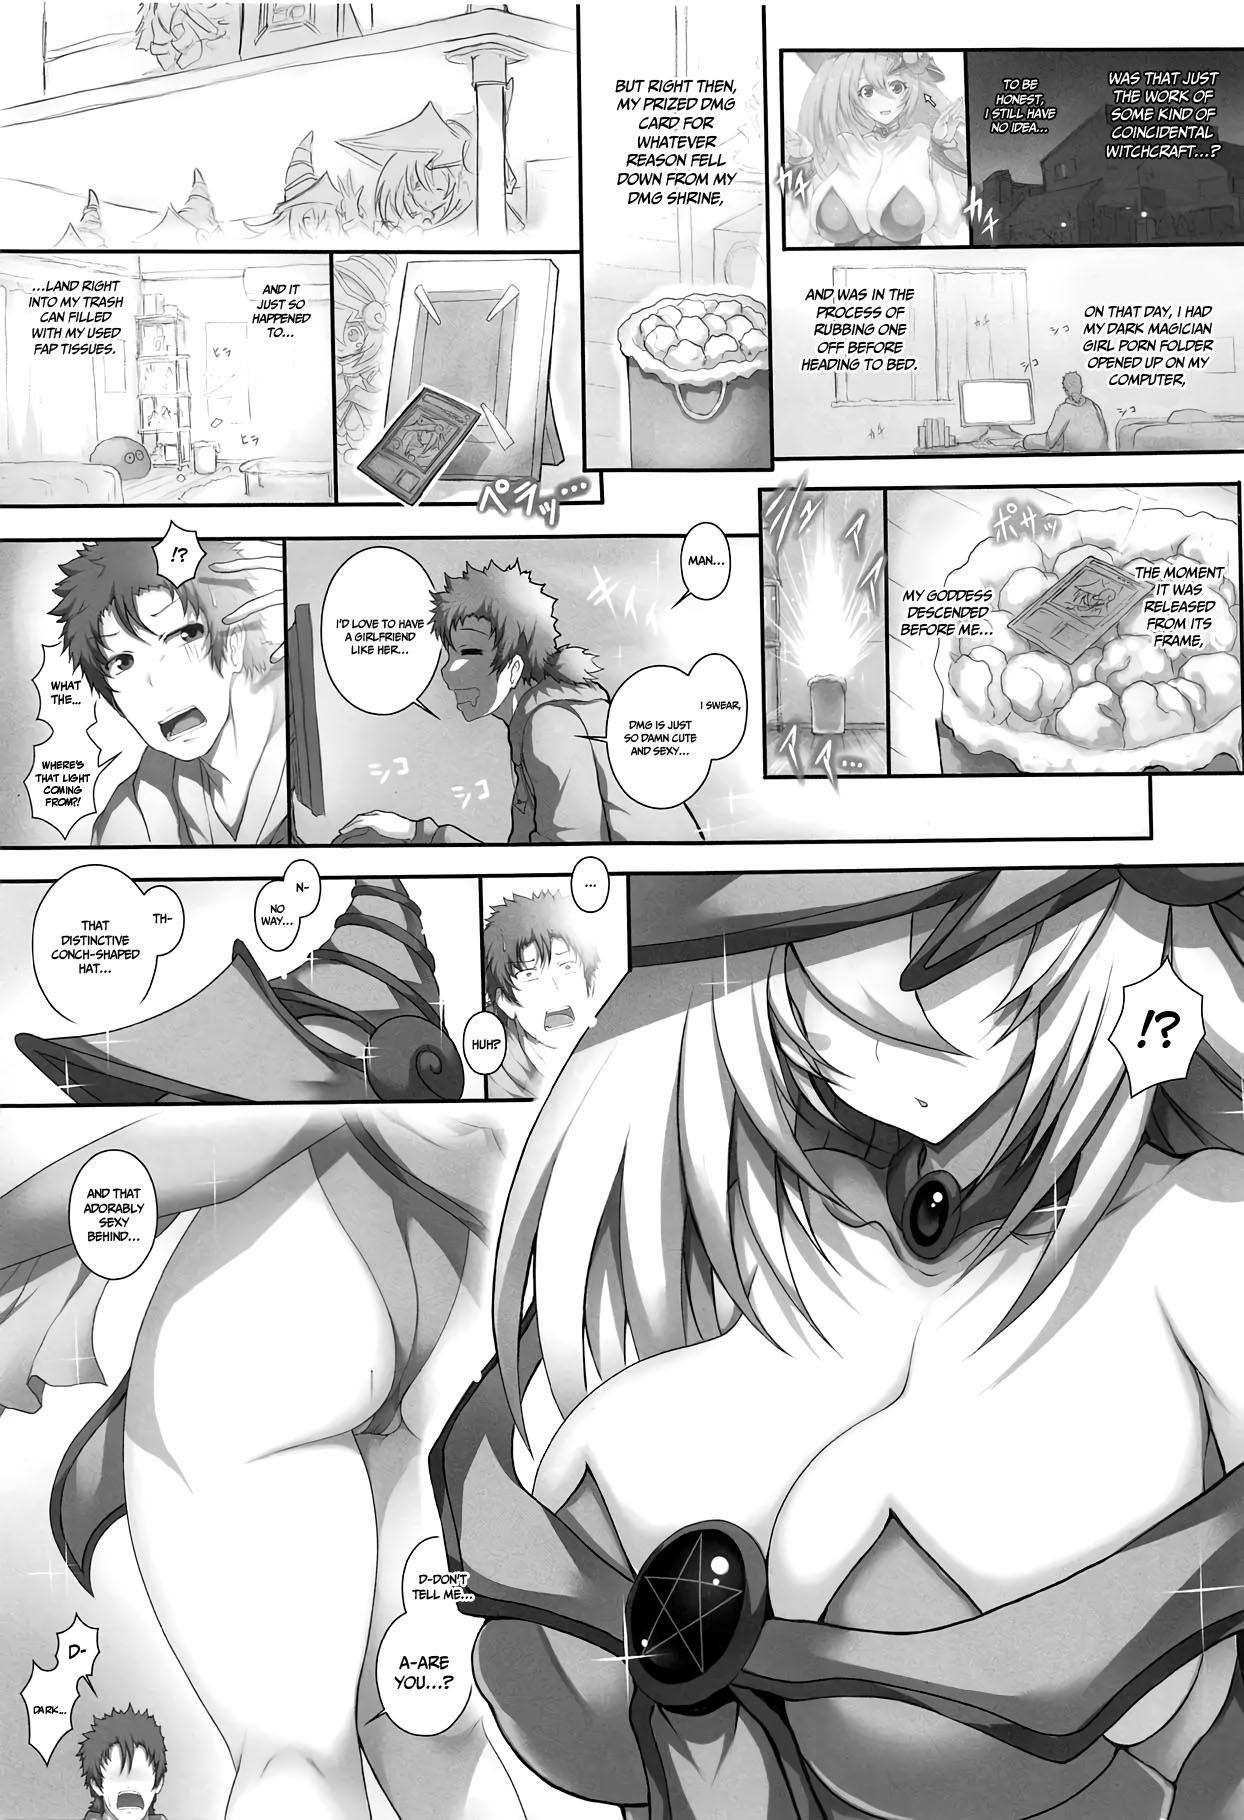 Threeway Girl to Issho | Together With Dark Magician Girl - Yu gi oh Couples - Page 2